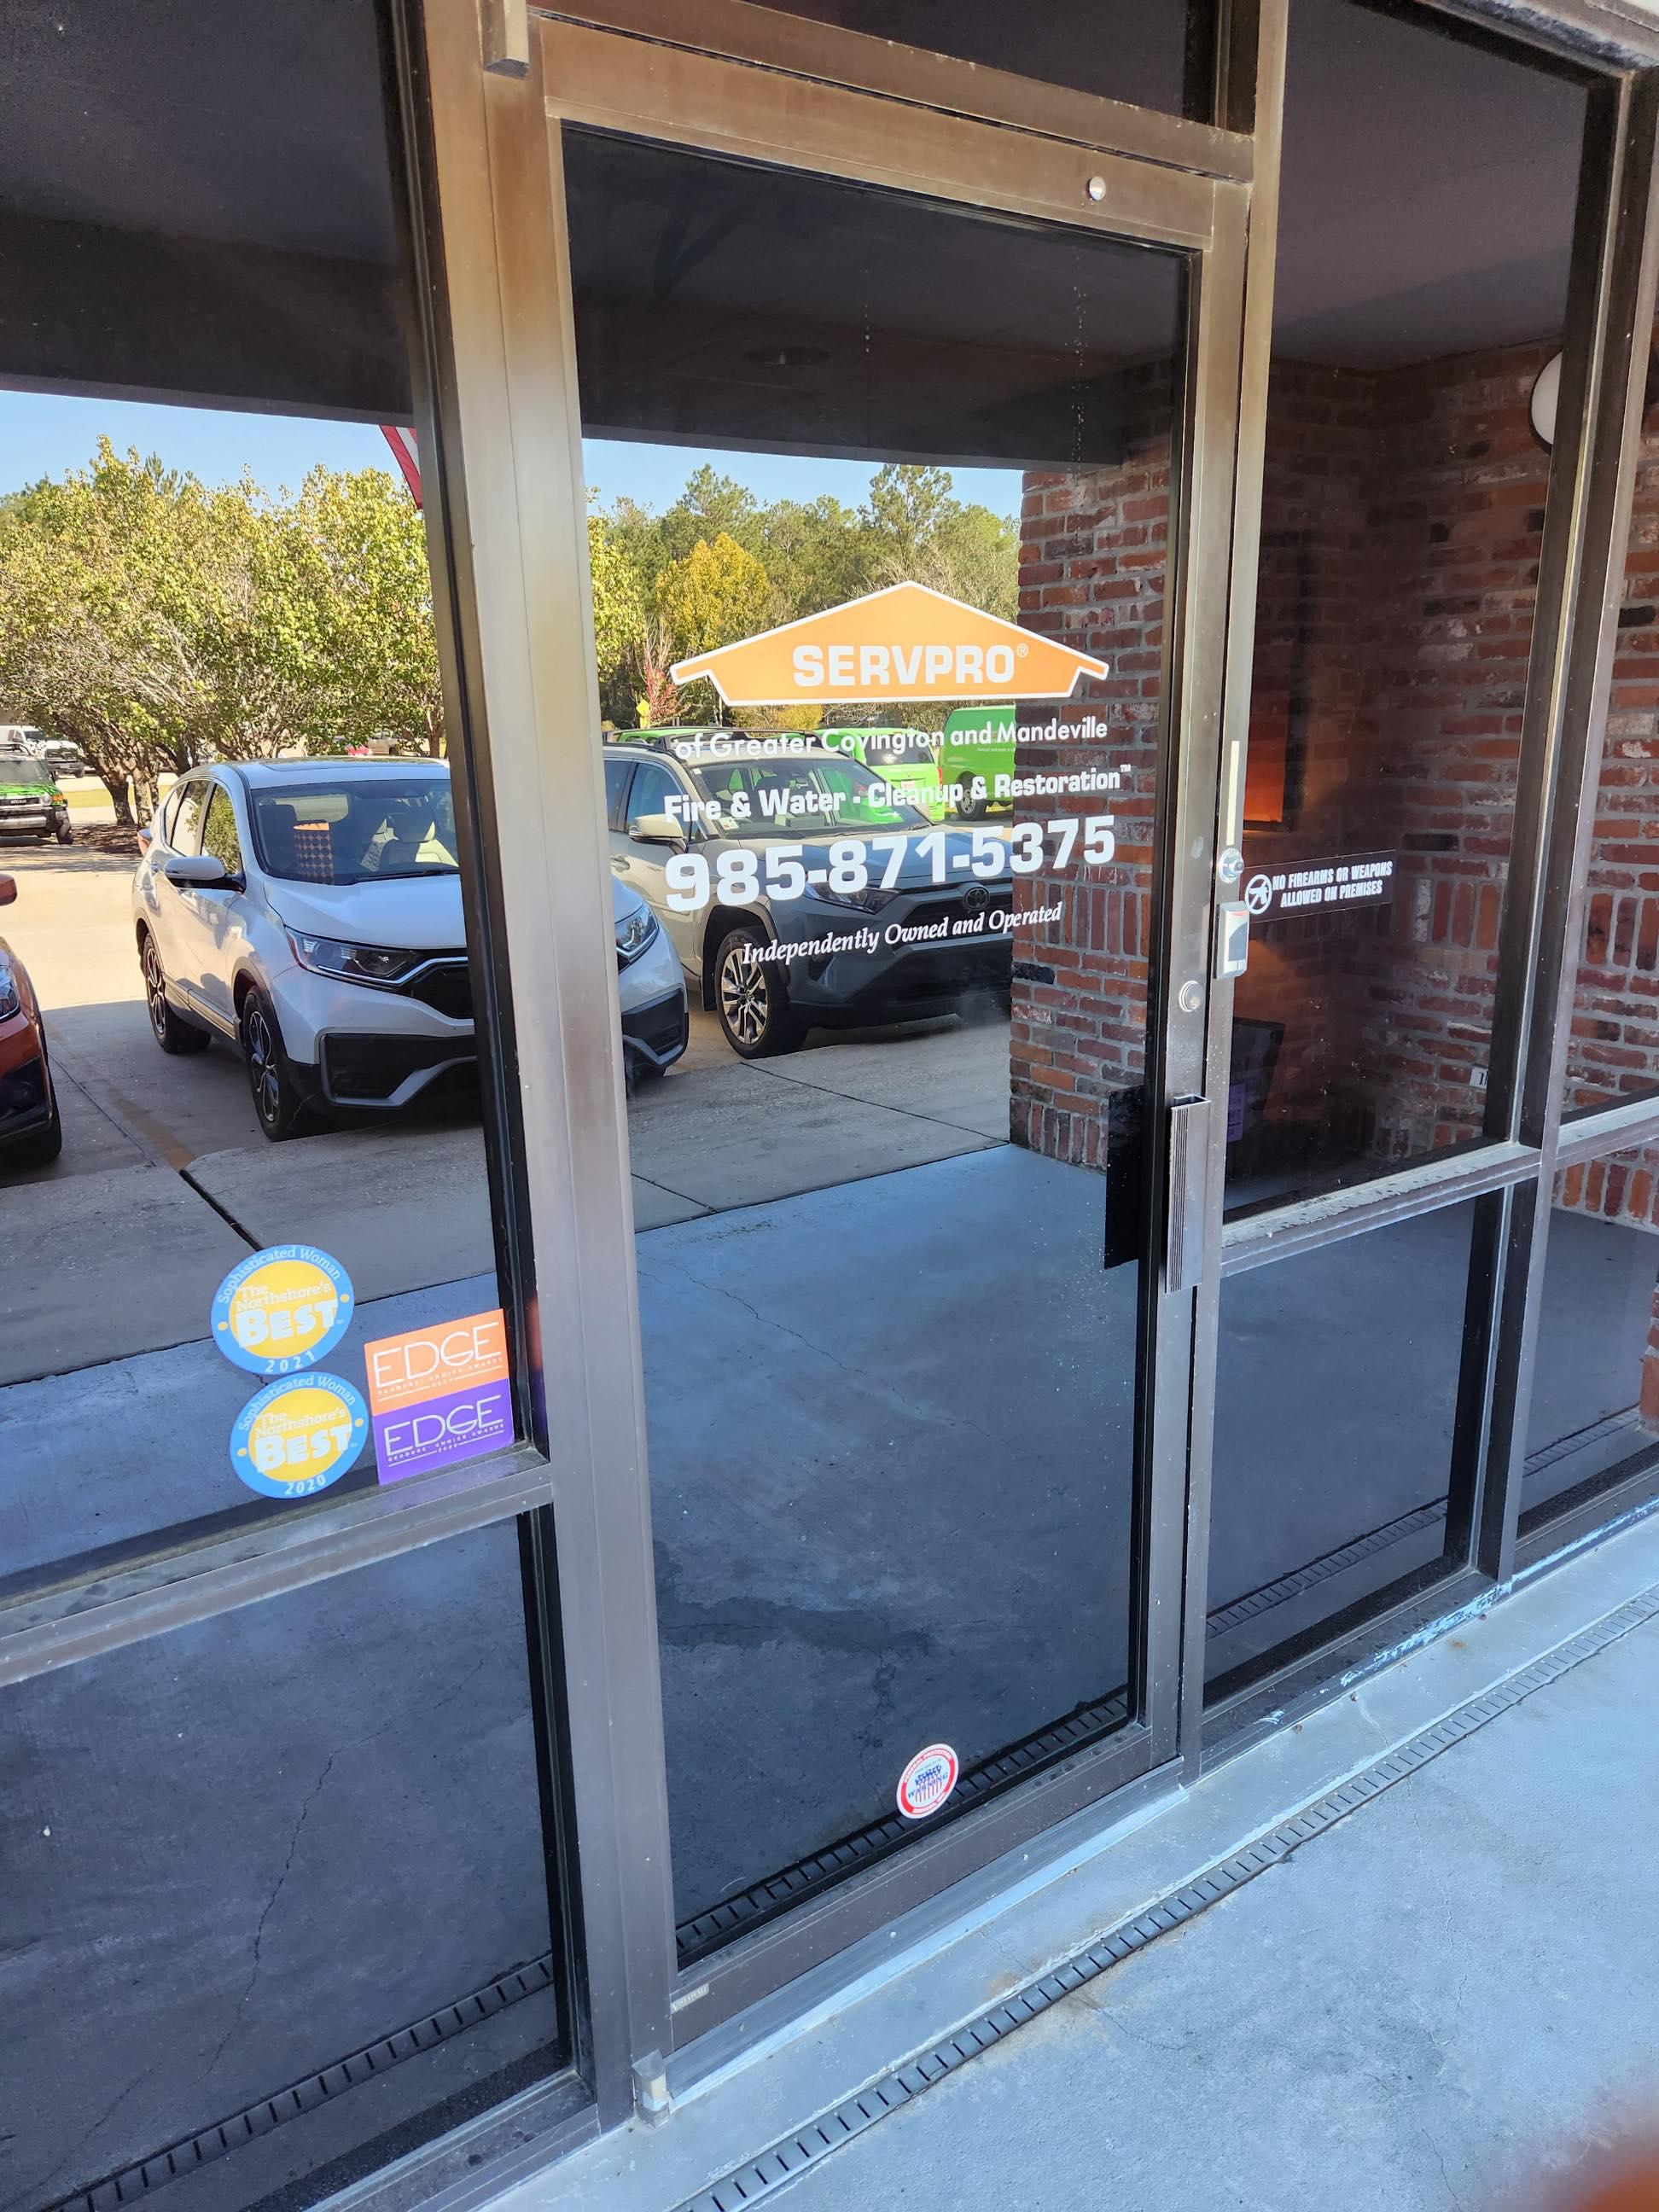 SERVPRO of Greater Covington and Mandeville's front office door with stickers of local awards for the best emergency restoration company.